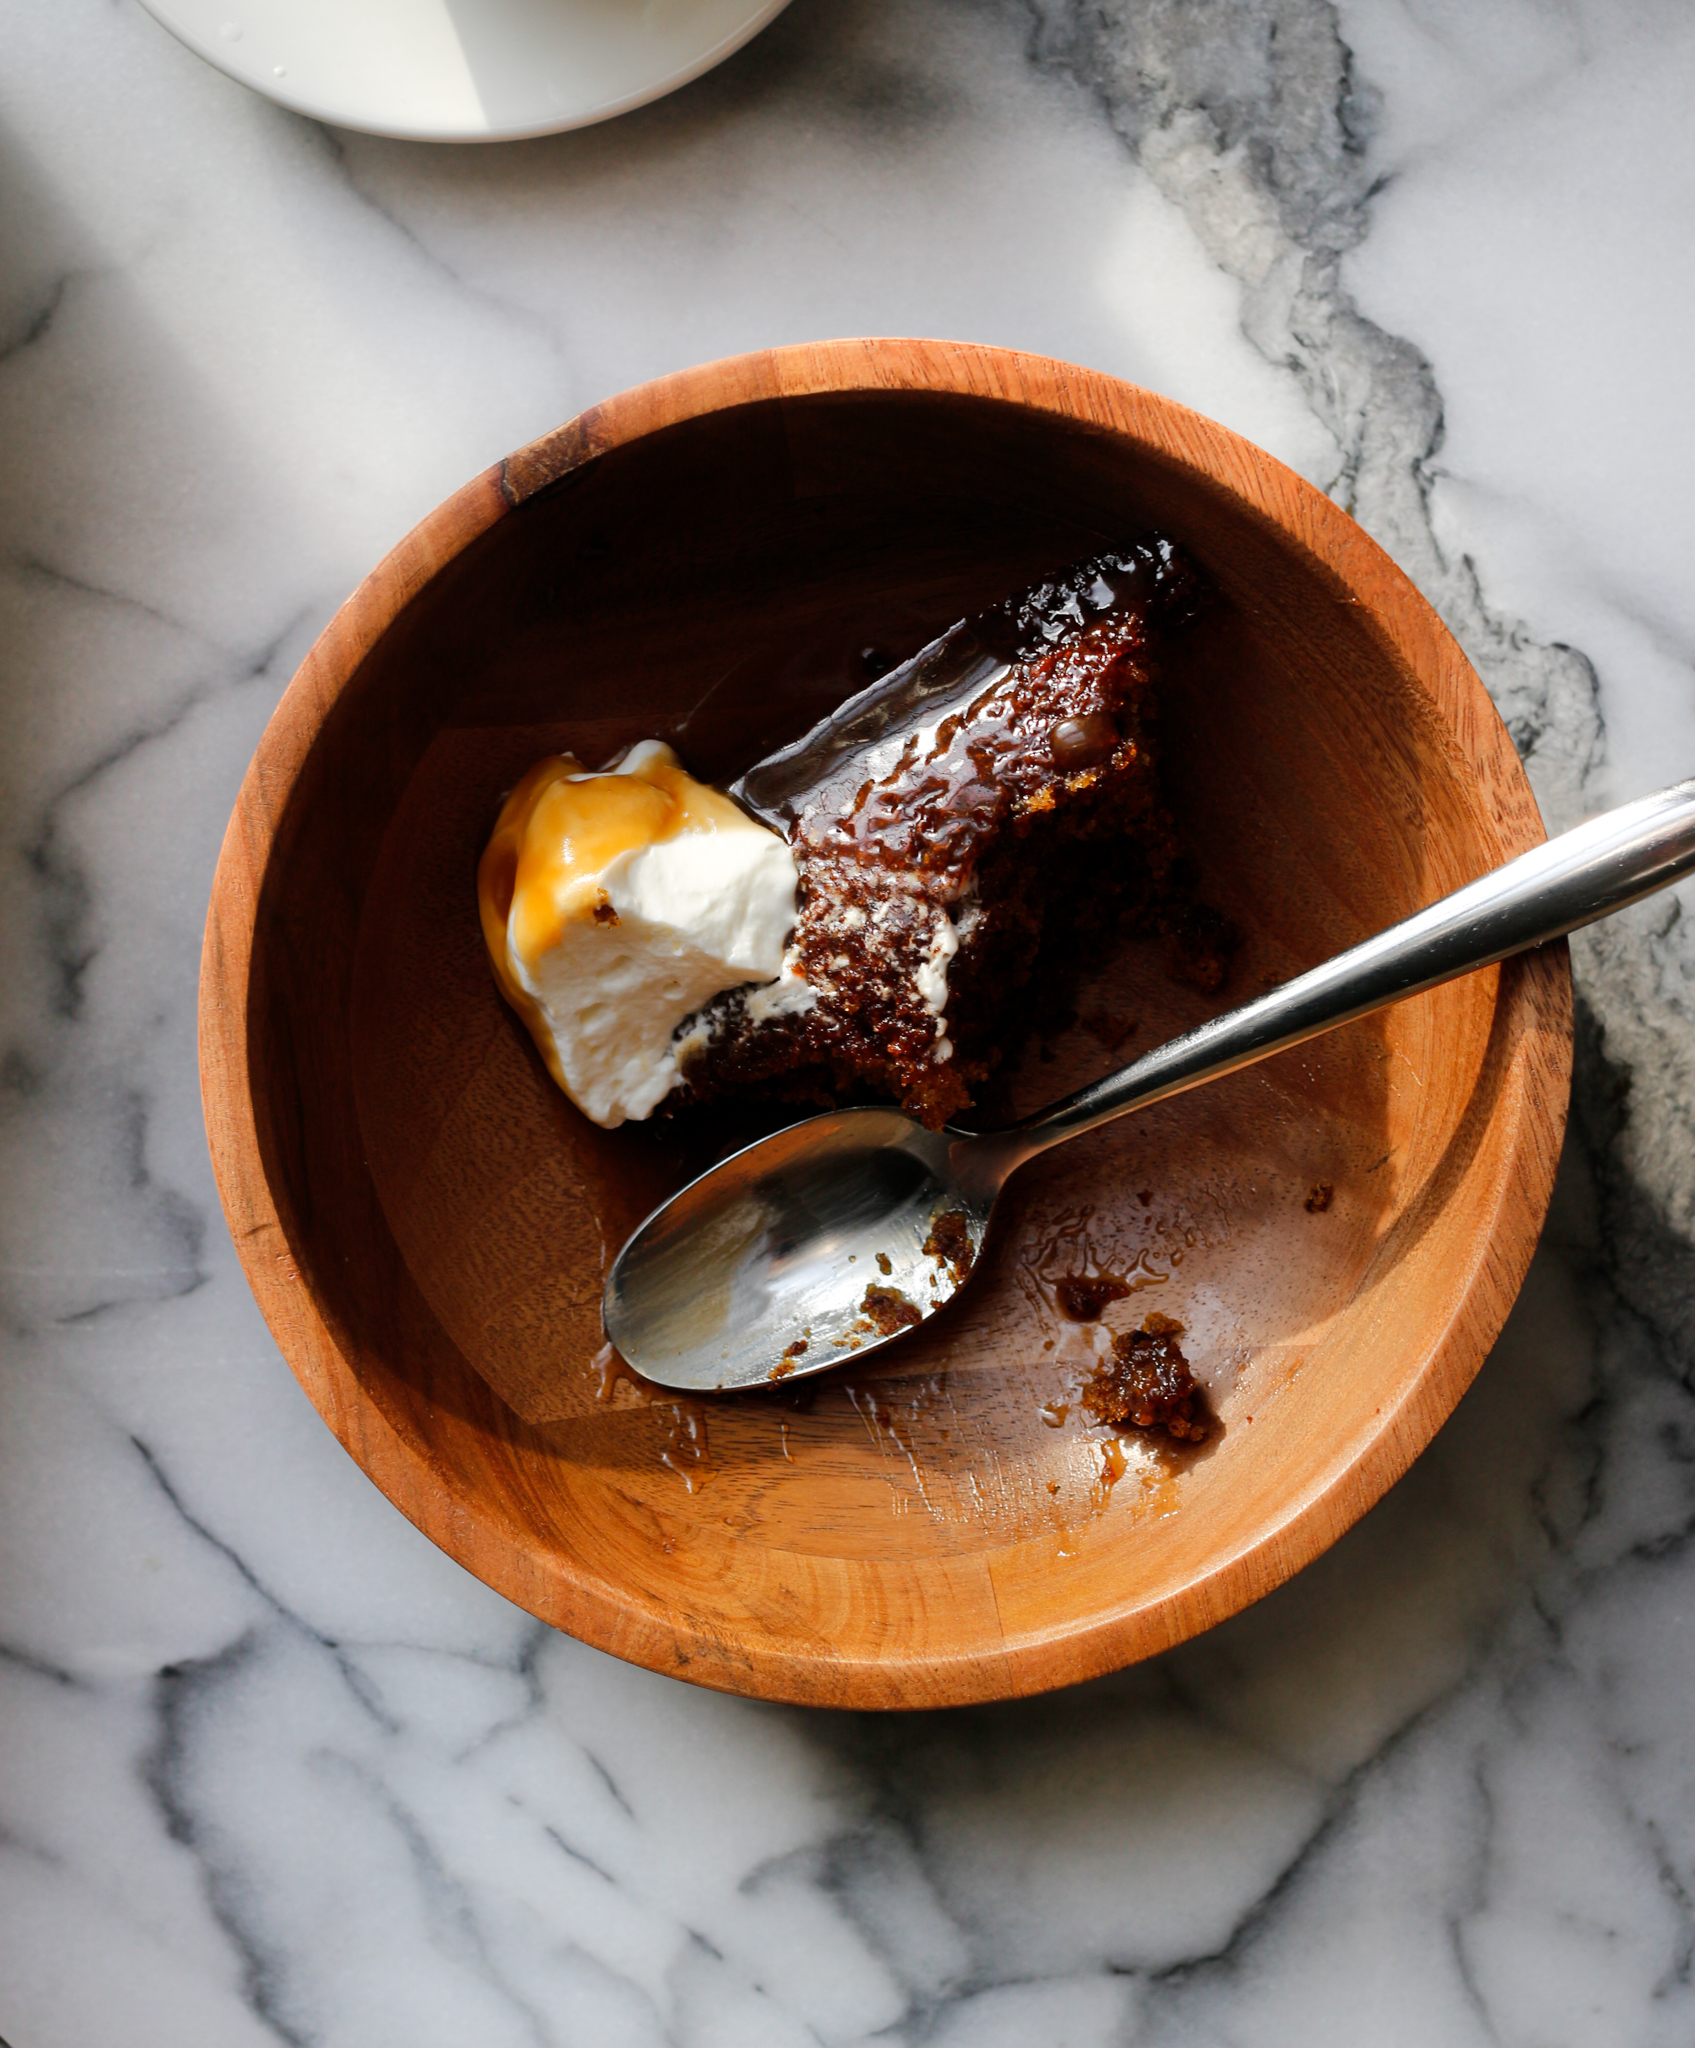 How to Make Sticky Date Pudding